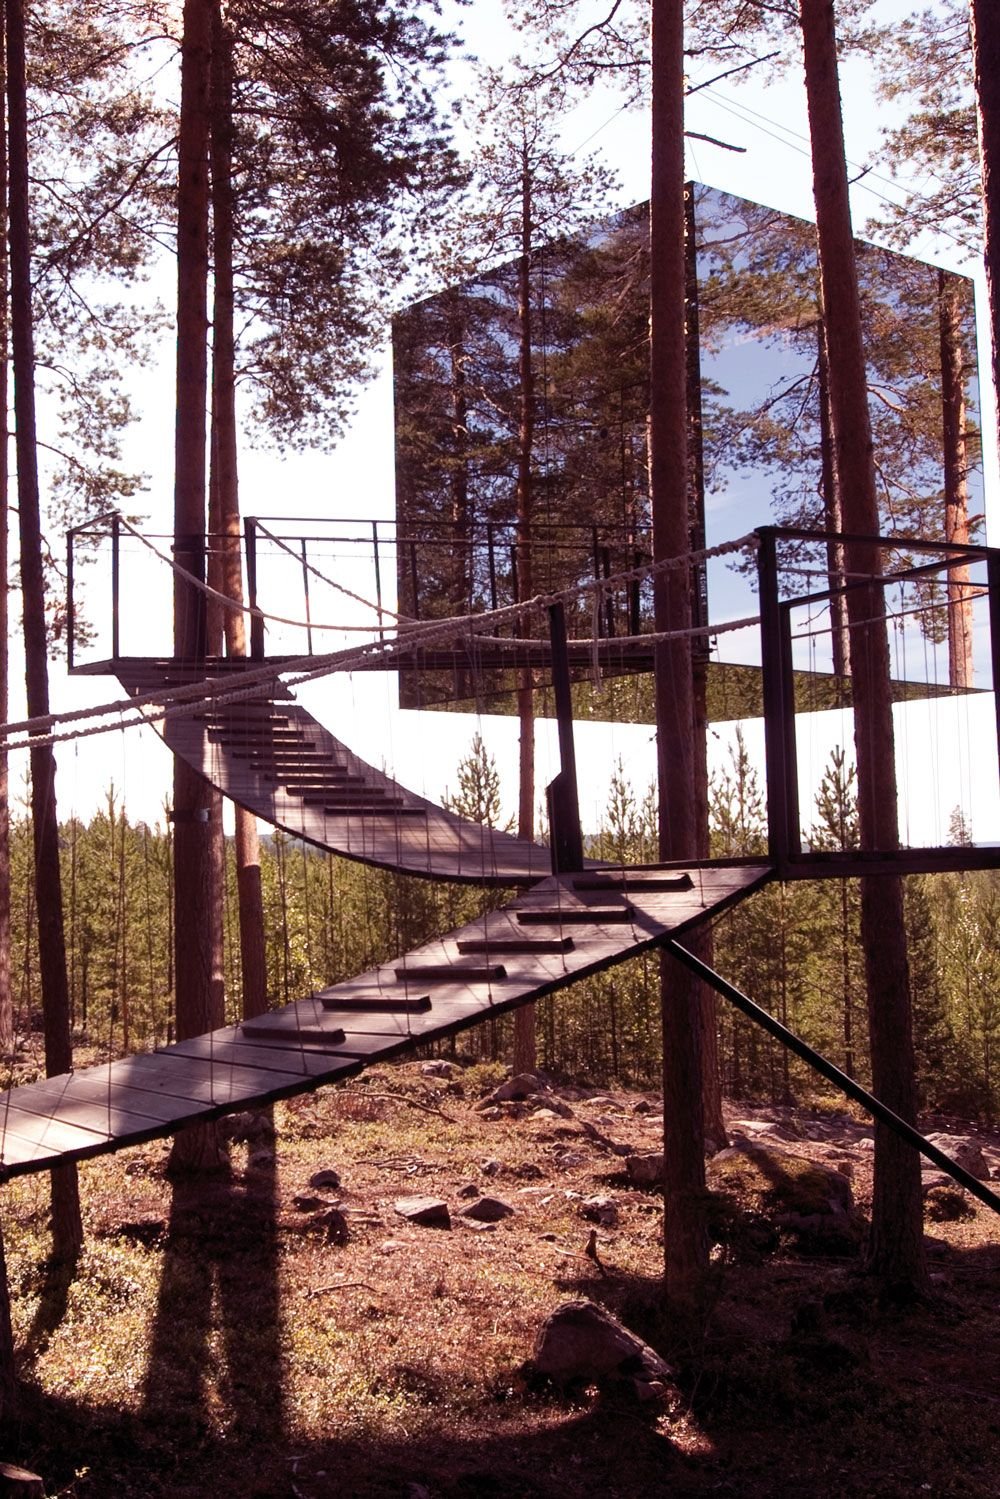 These modern treehouses will inspire your next project